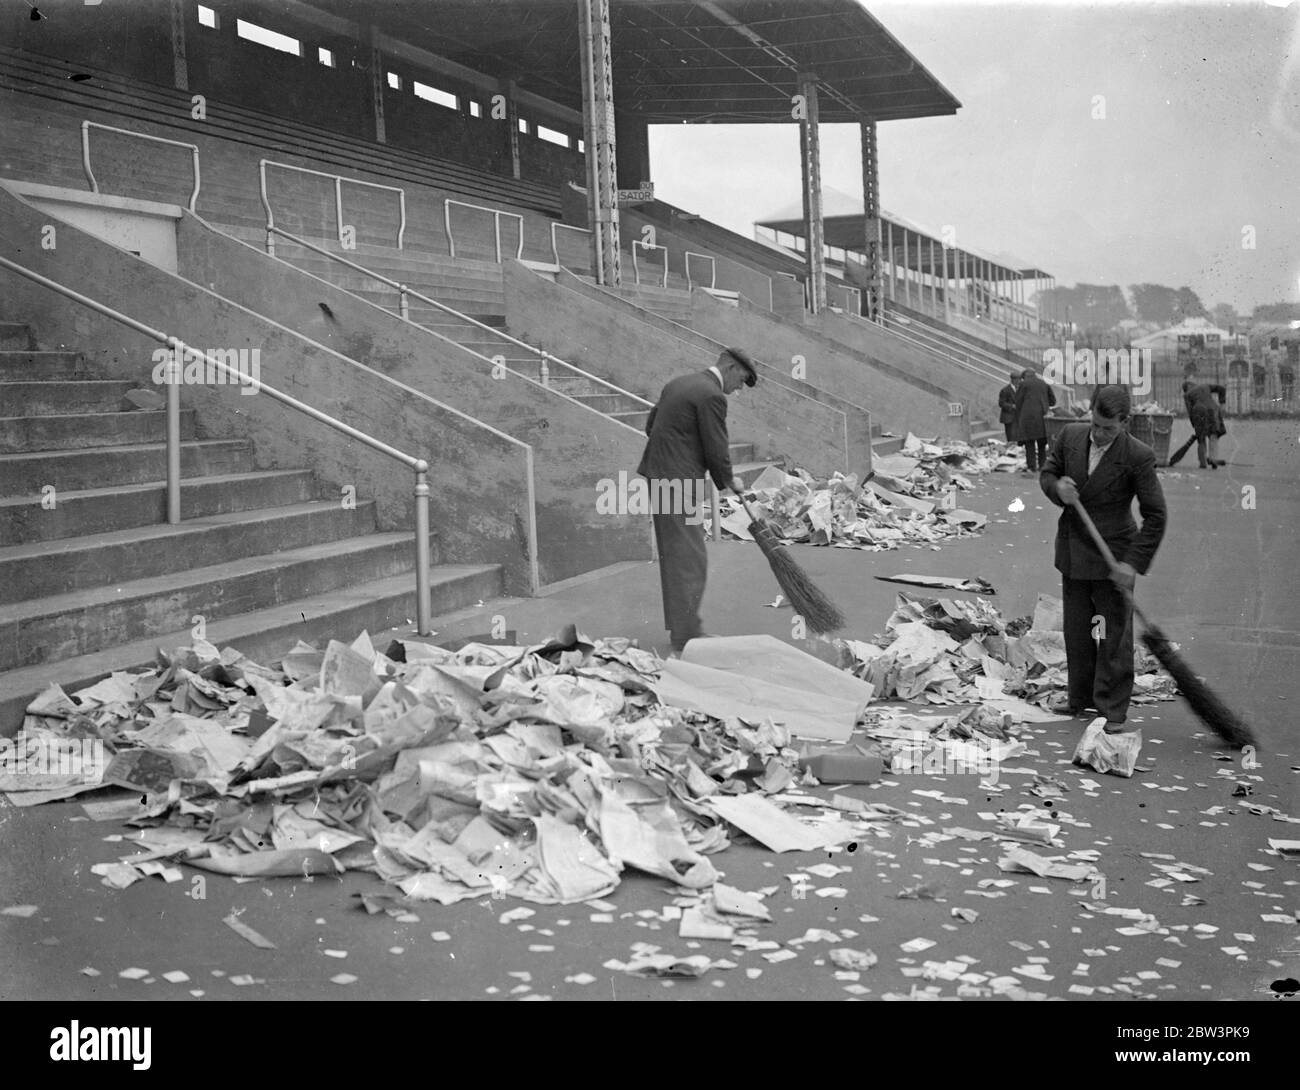 Cleaning up Epsom Downs after Derby Crowds . An army of cleaners descended on Epsom Downs to remove the litter tons of it left behind by the Derby crowds . Photo shows , cleaning up on Epsom Downs this morning ( Thursday ) . 28 May 1936 Stock Photo